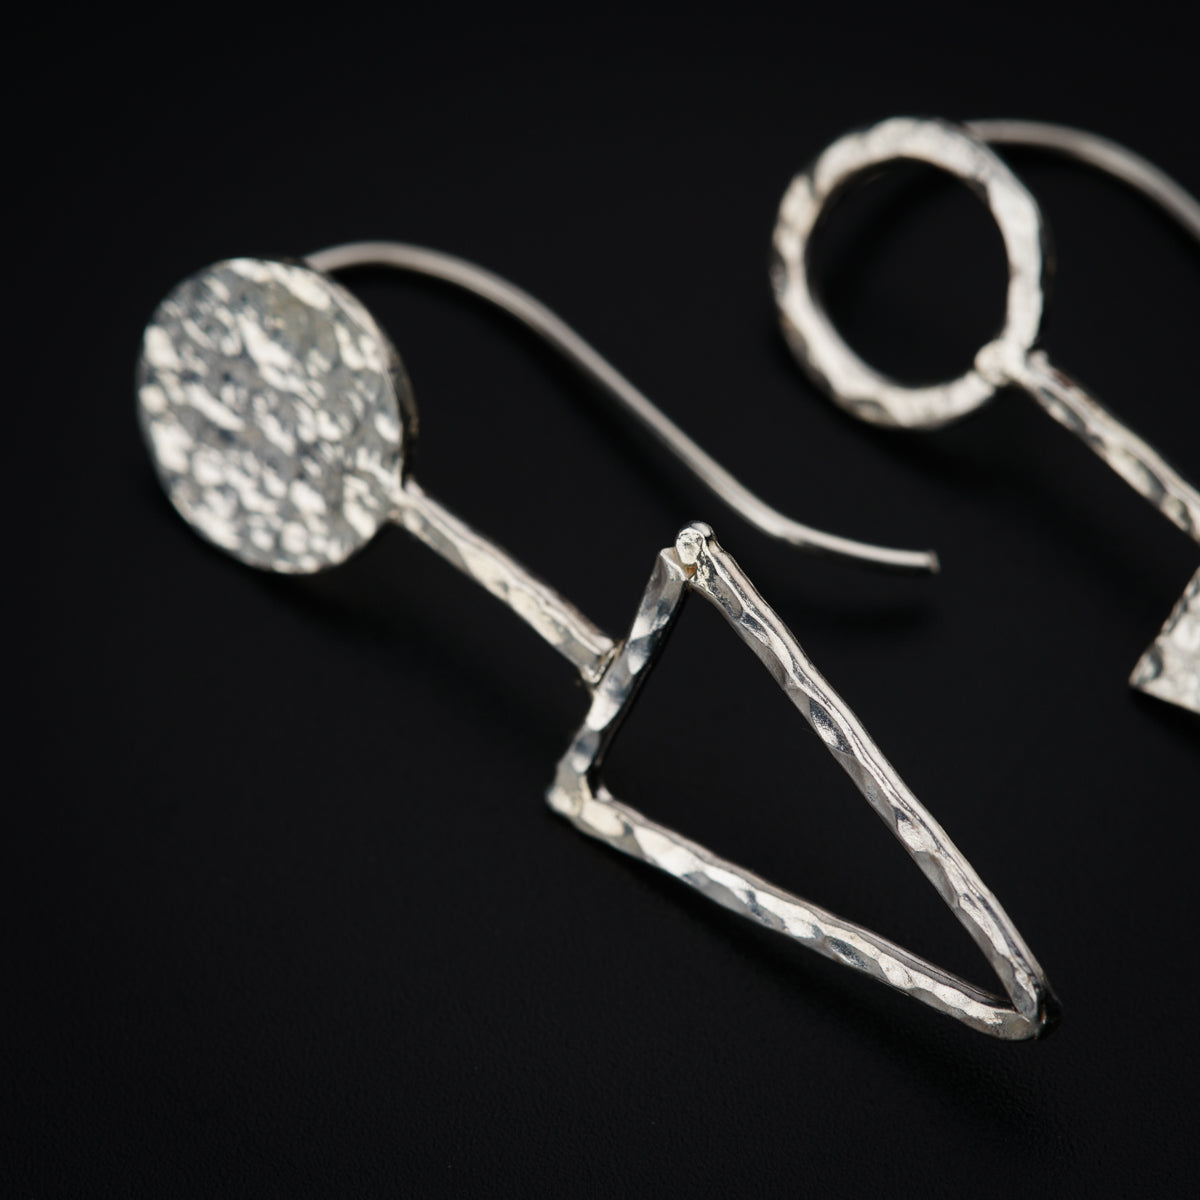 a pair of silver earrings on a black surface